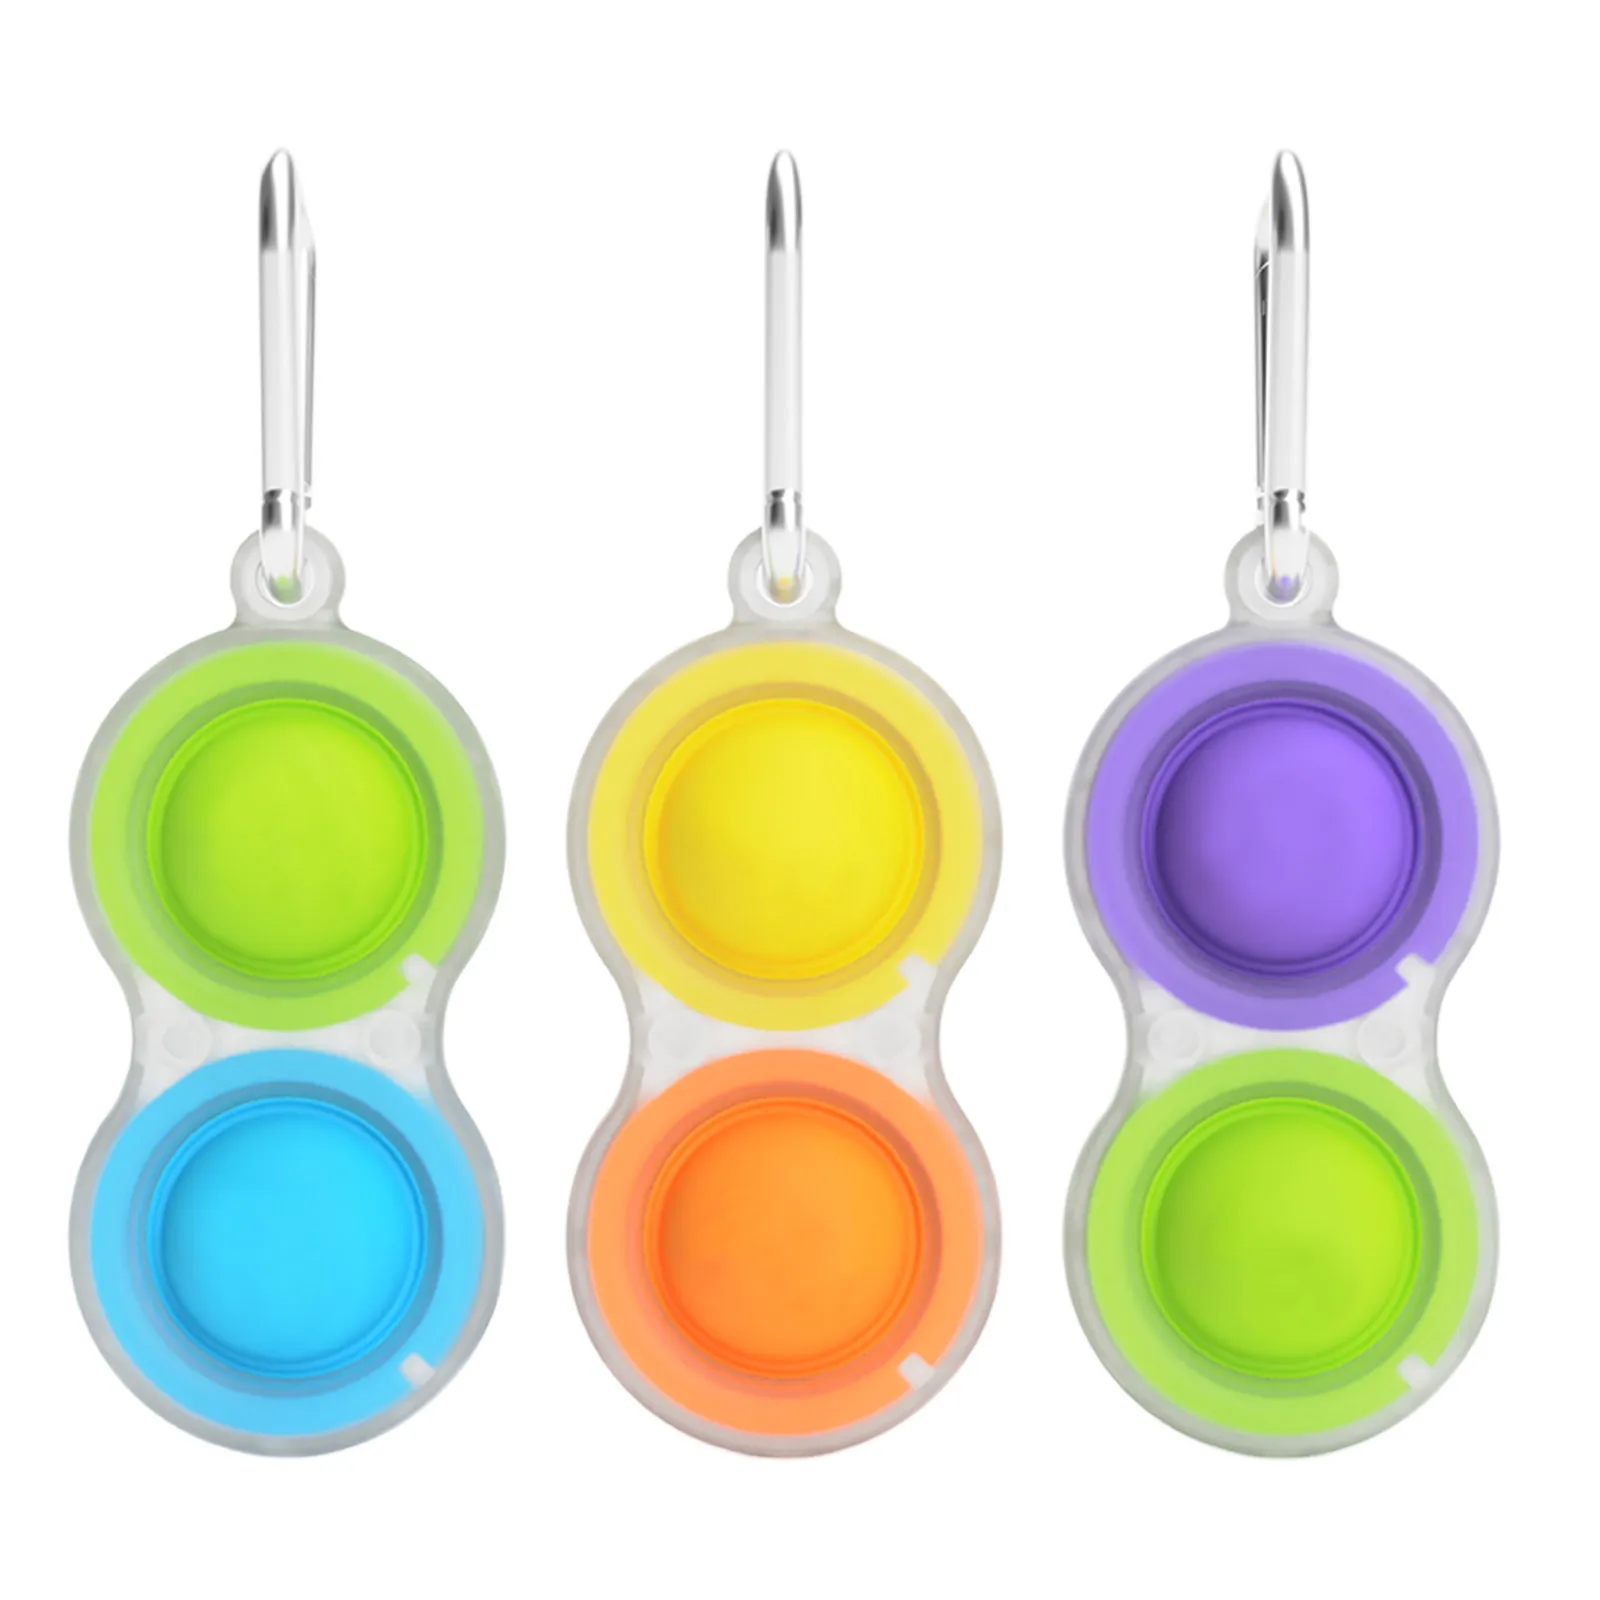 

Simple Dimple Fidget Toy Pops-it Small Stress Relief Keyring Need Pendant Push Bubbles Autism Special Needs Adult Kids Toys